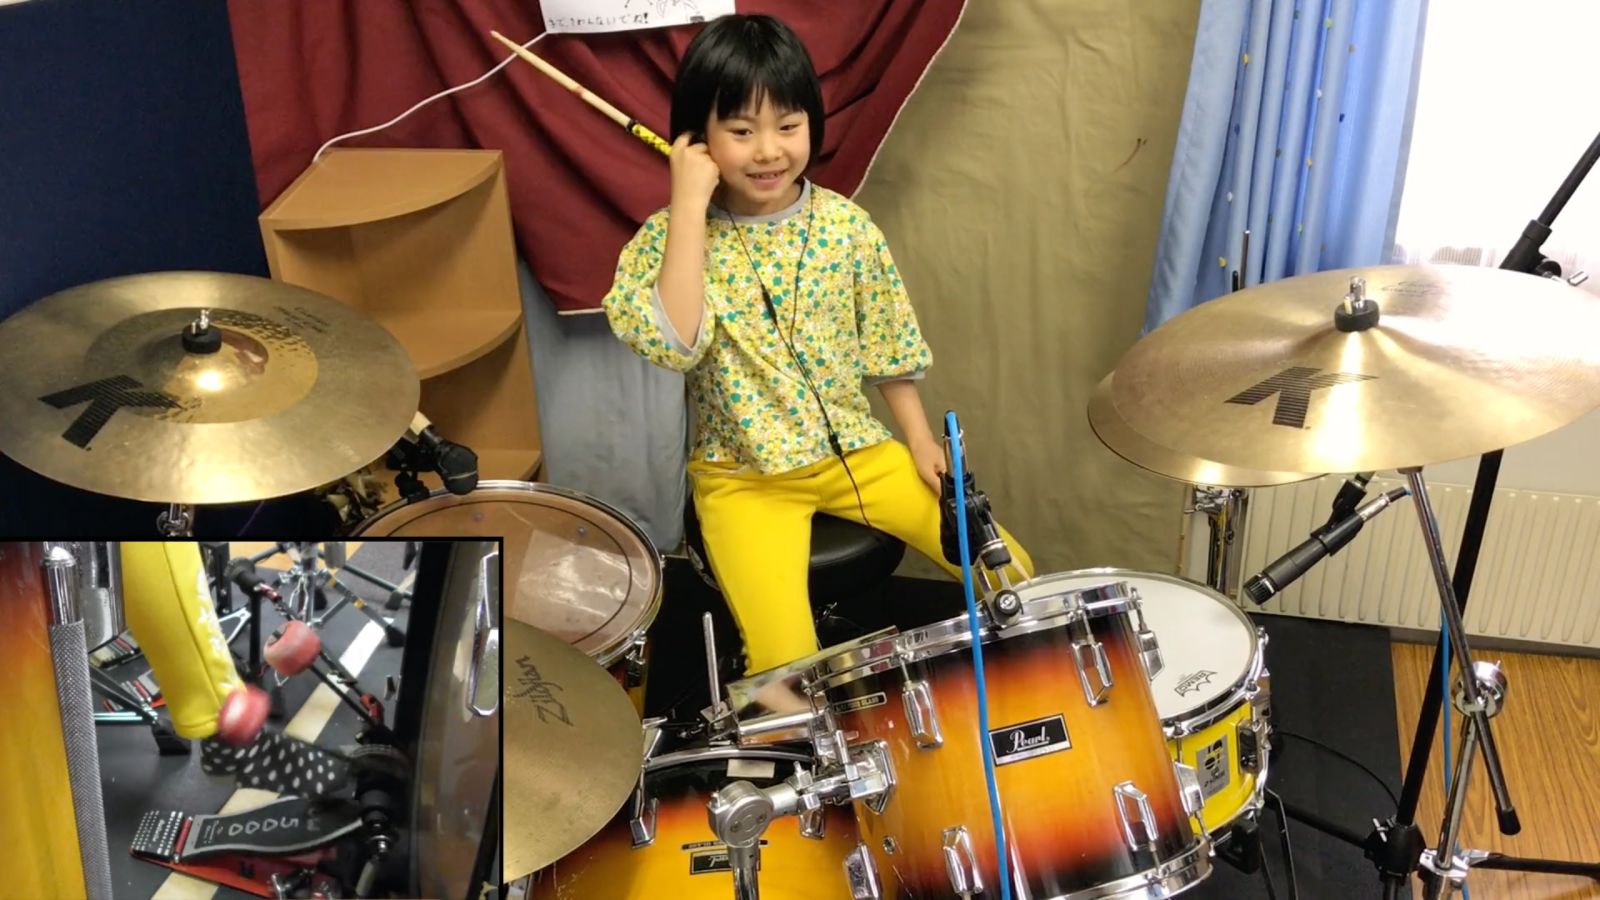 From Kid Drummer To Music Sensation: The Transformation Of A Rockstar